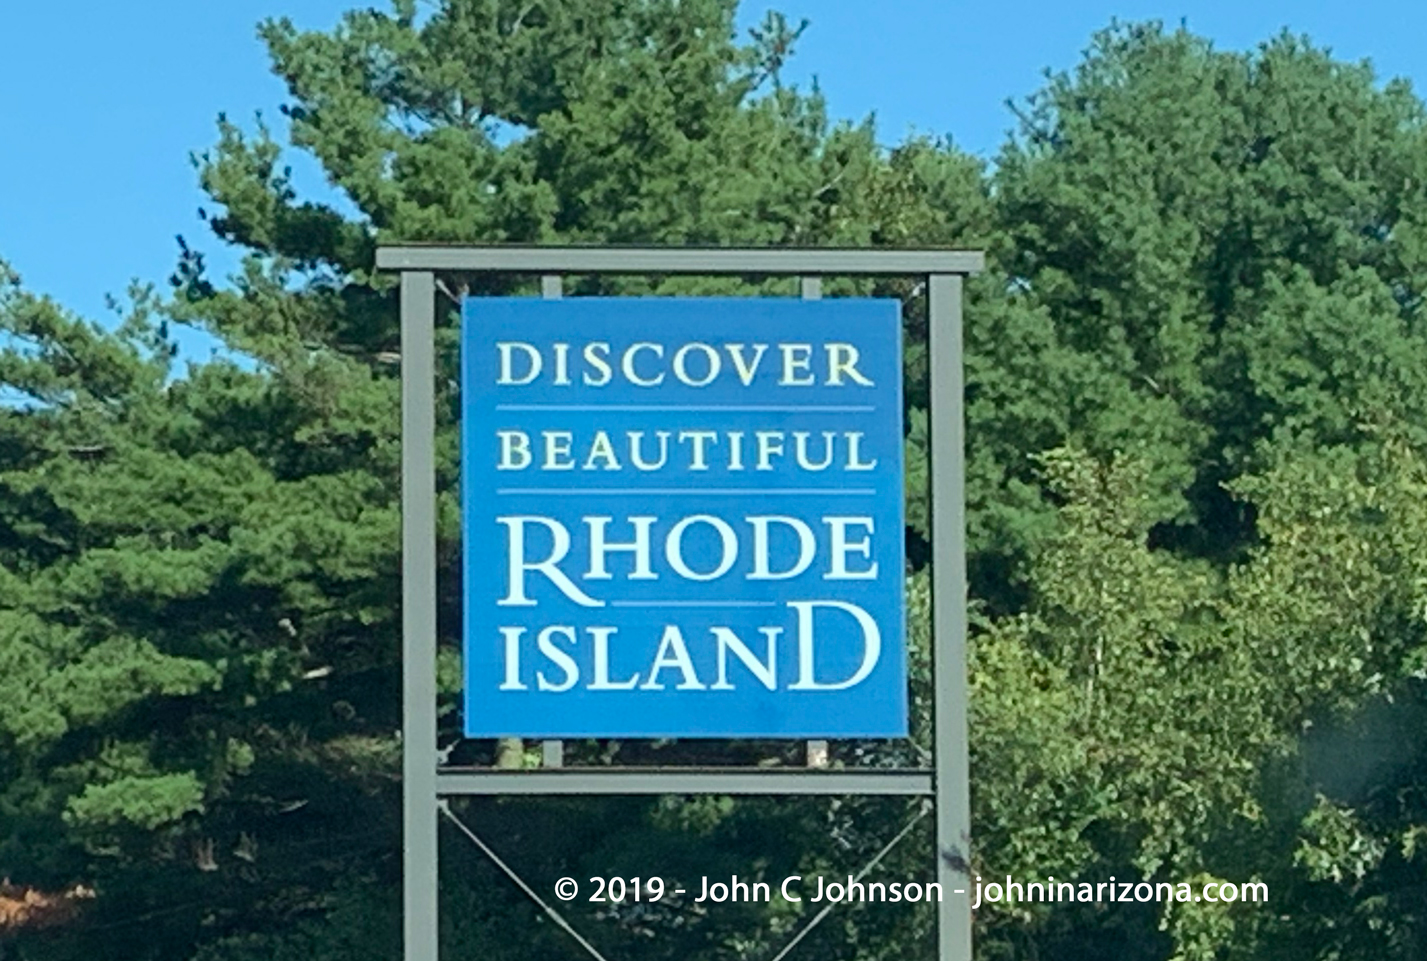 Welcome to Rhode Island sign